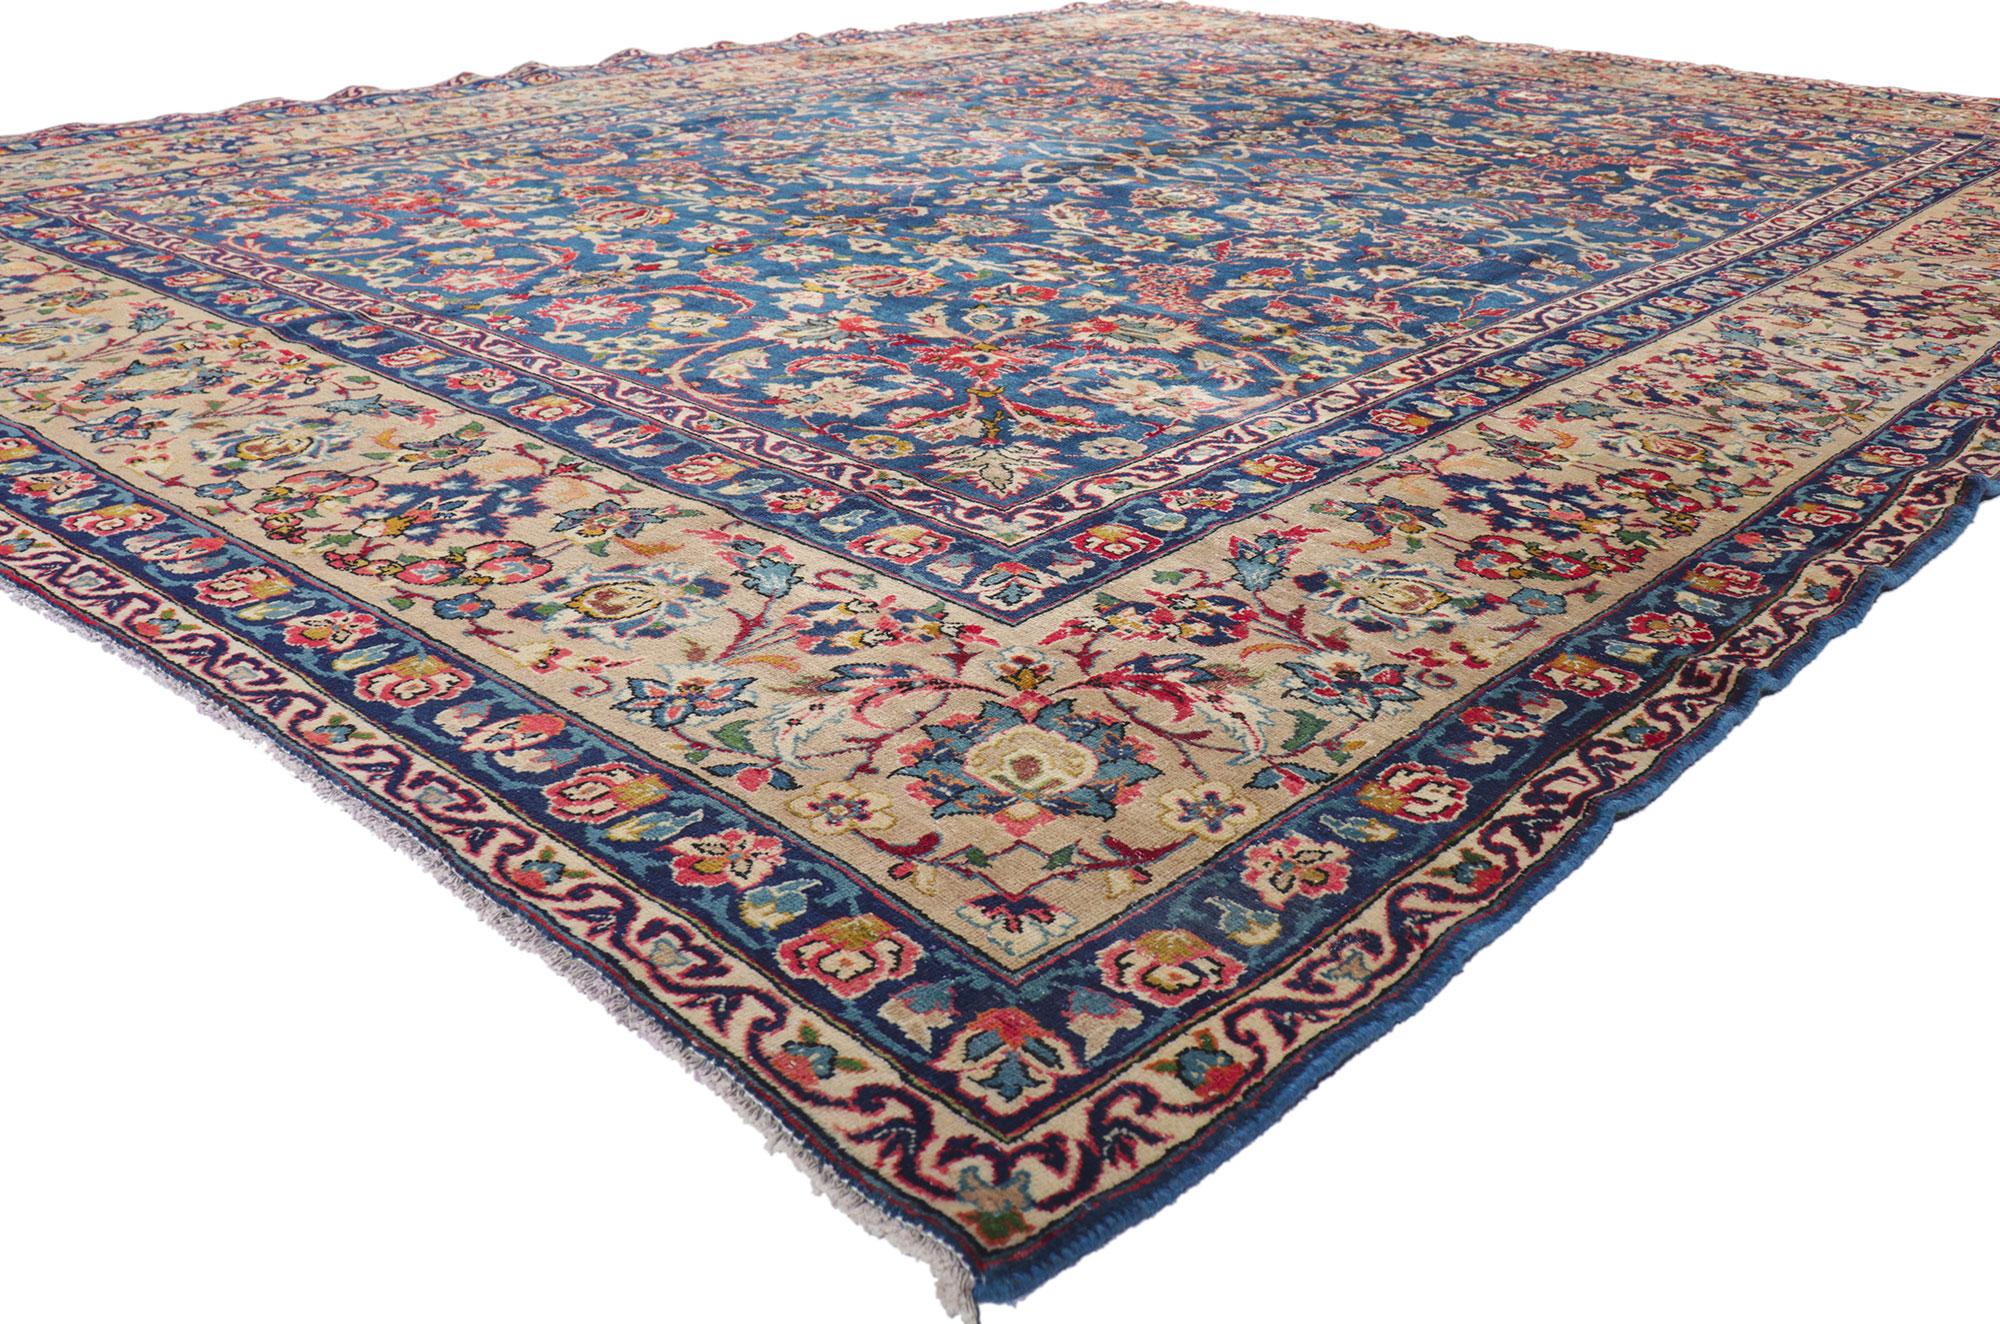 61207 Vintage Persian Isfahan rug, 09'10 x 13'00.
With its effortless beauty and timeless design, this hand-knotted wool vintage Persian Isfahan rug is poised to impress. The abrashed blue field features an allover botanical pattern composed of